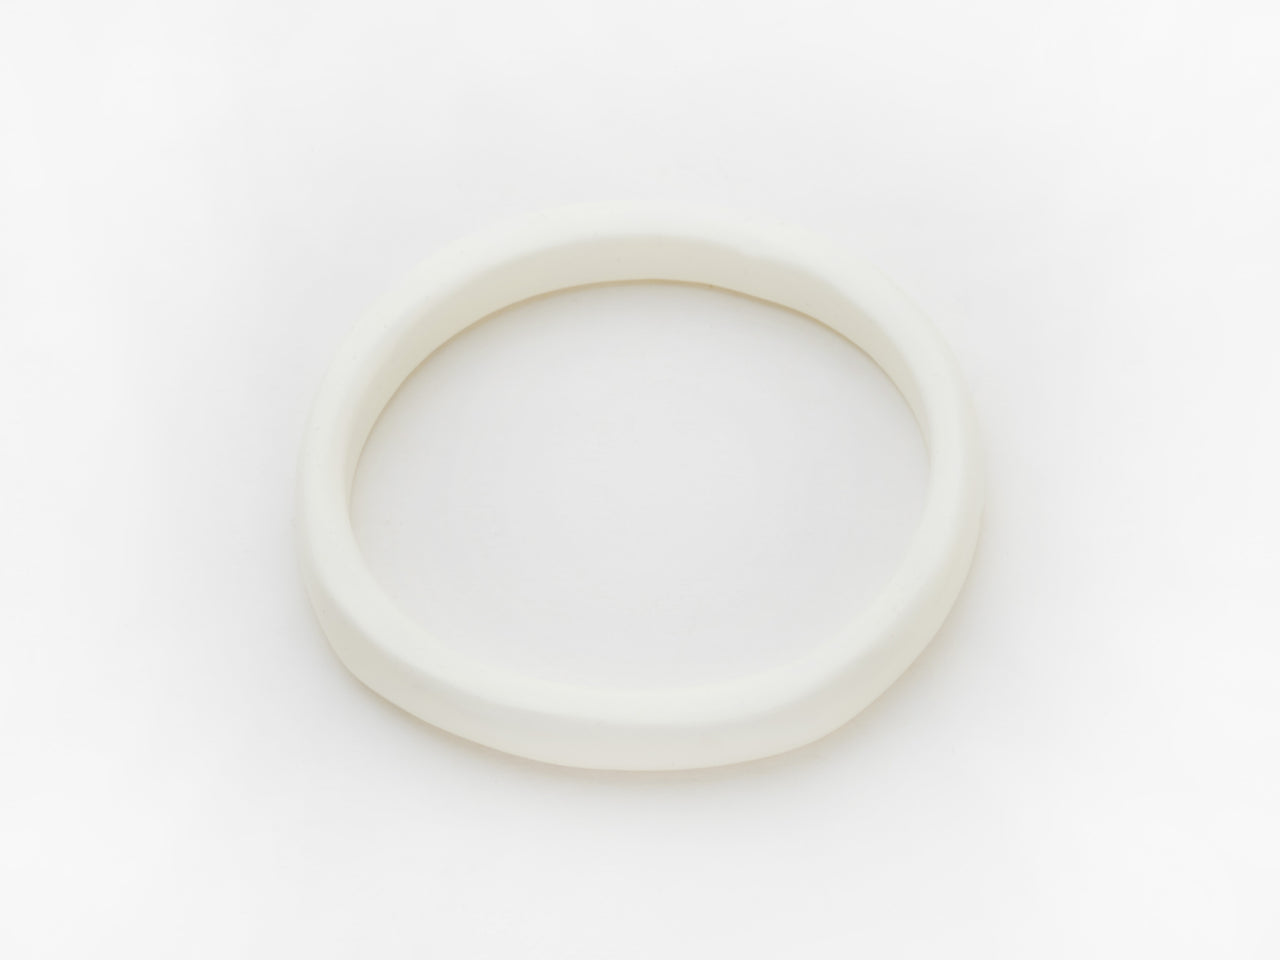 Creole Bangle in White